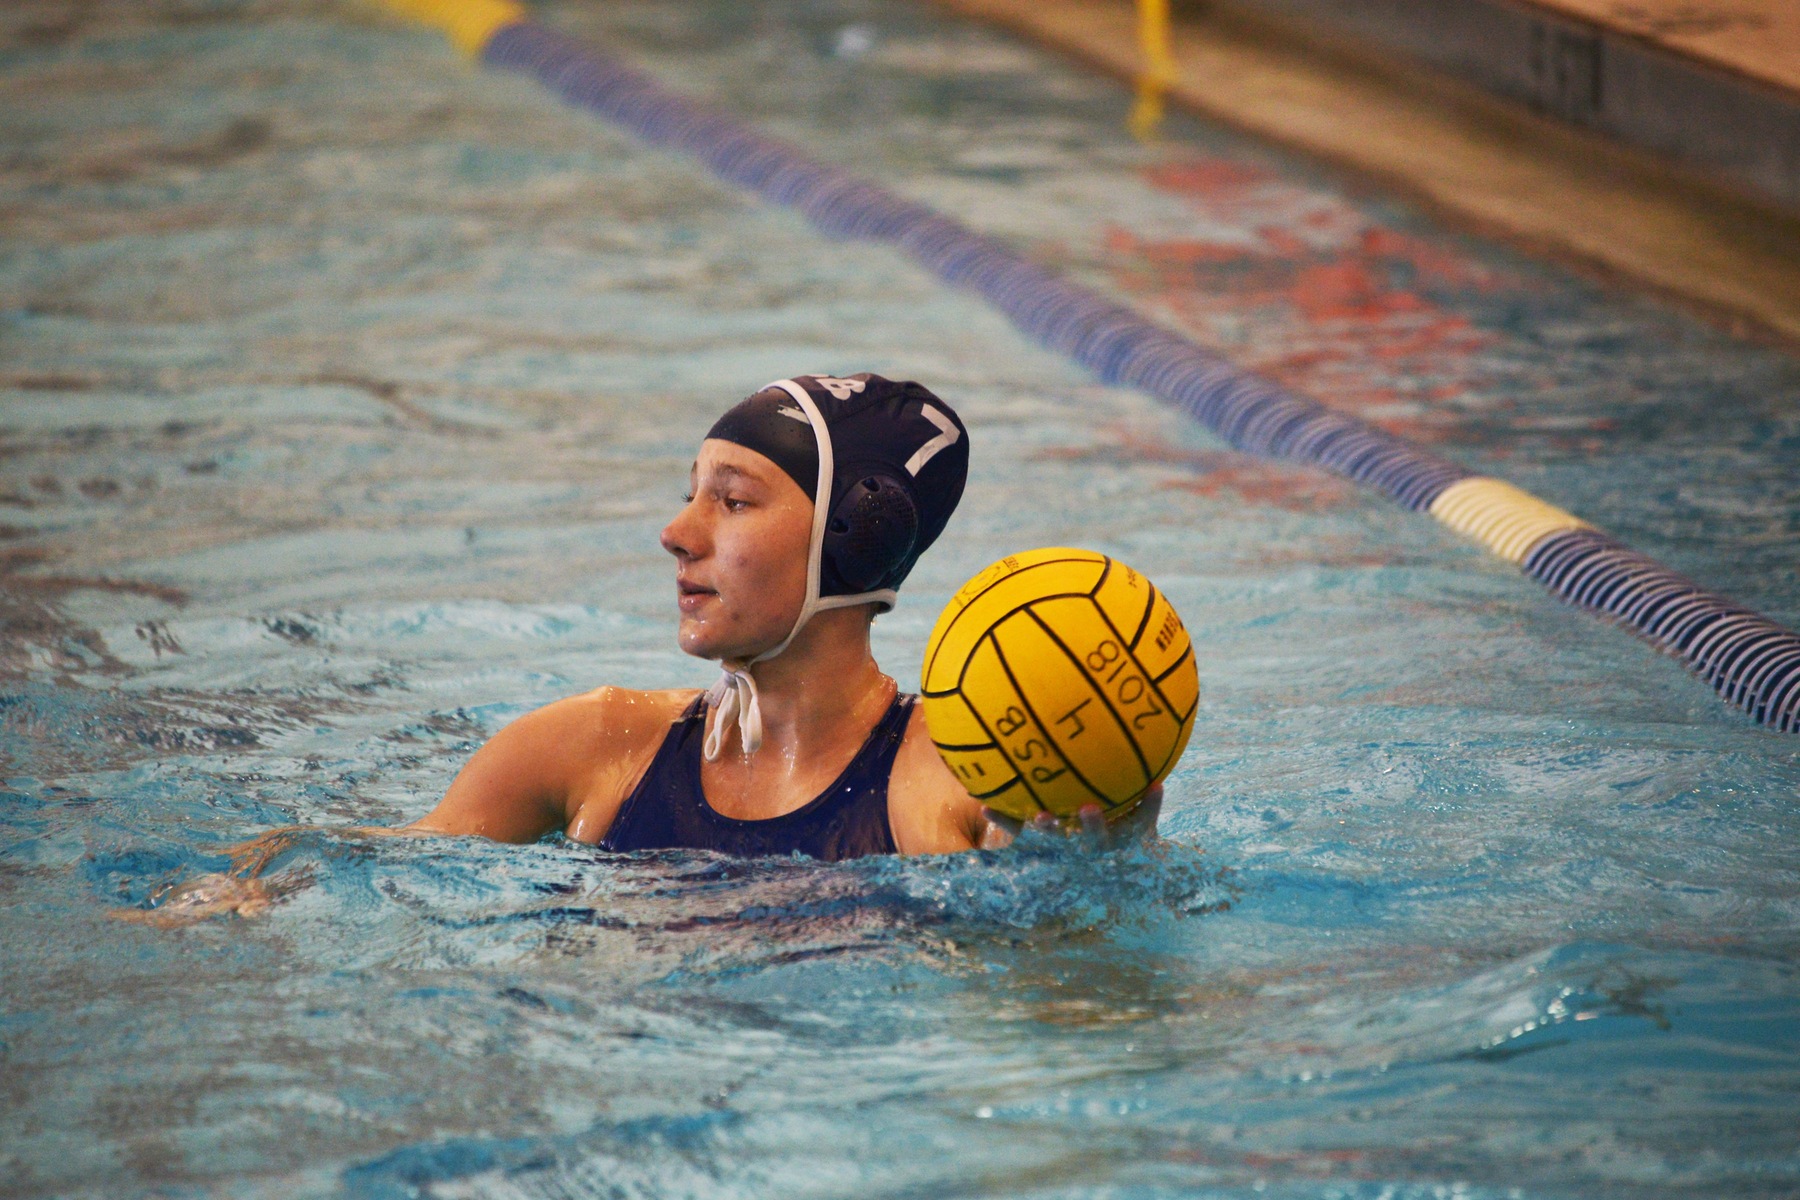 Lions Finish Eighth in CWPA Championships to Close Out Season